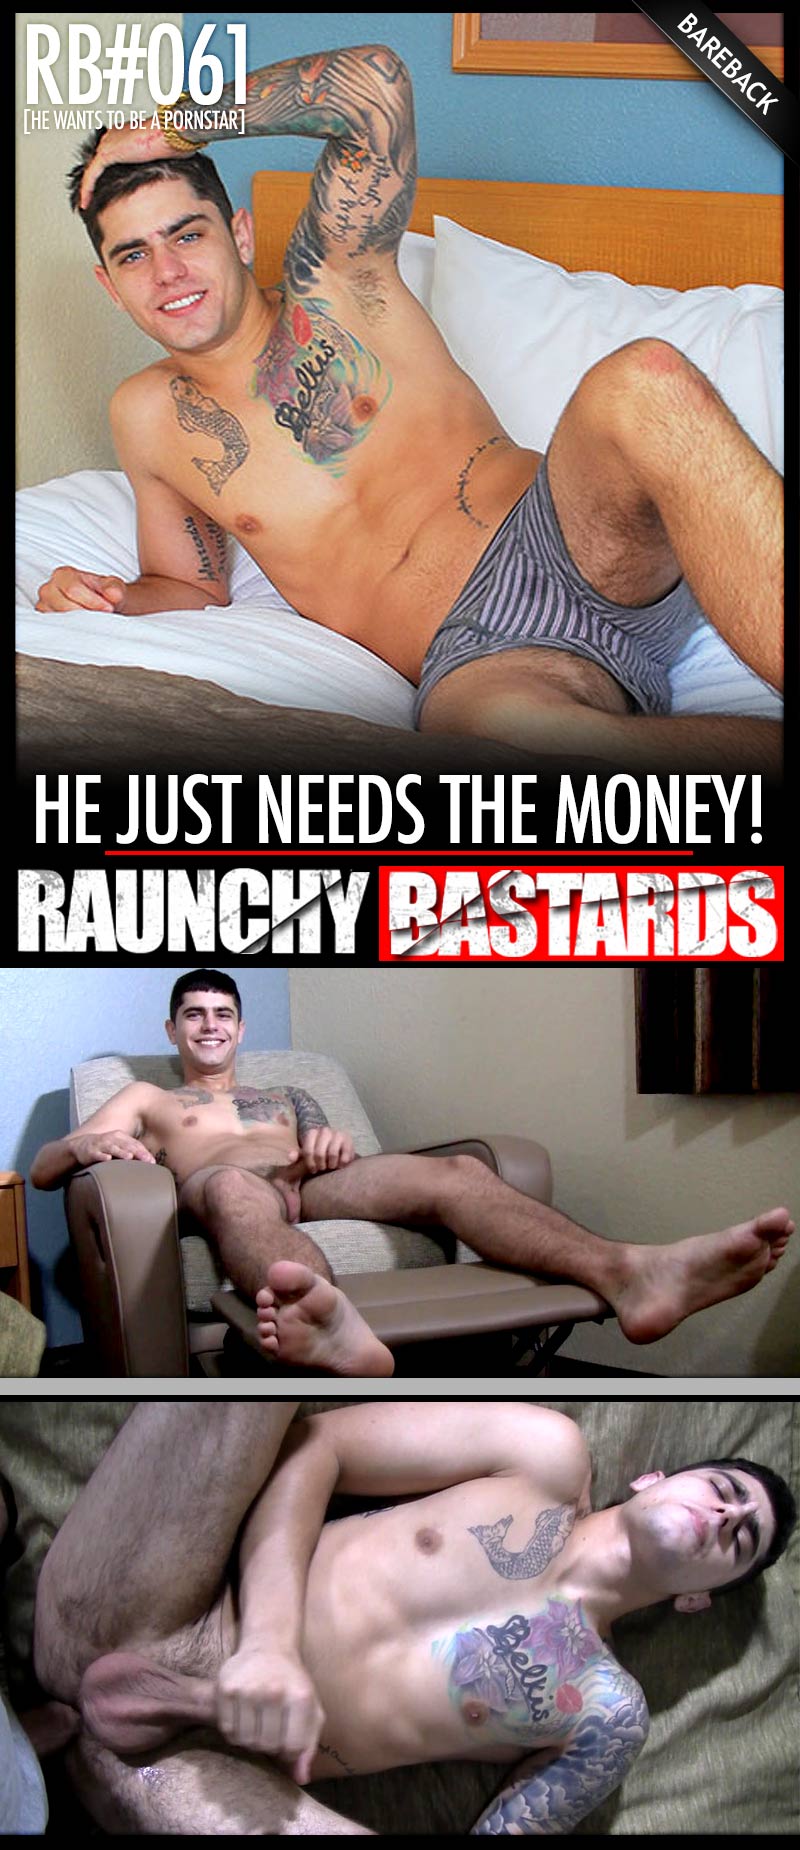 Episode #061 (He Wants To Be A Pornstar): He Just Needs The Money (feat. Danny Luca) at Raunch Bastards